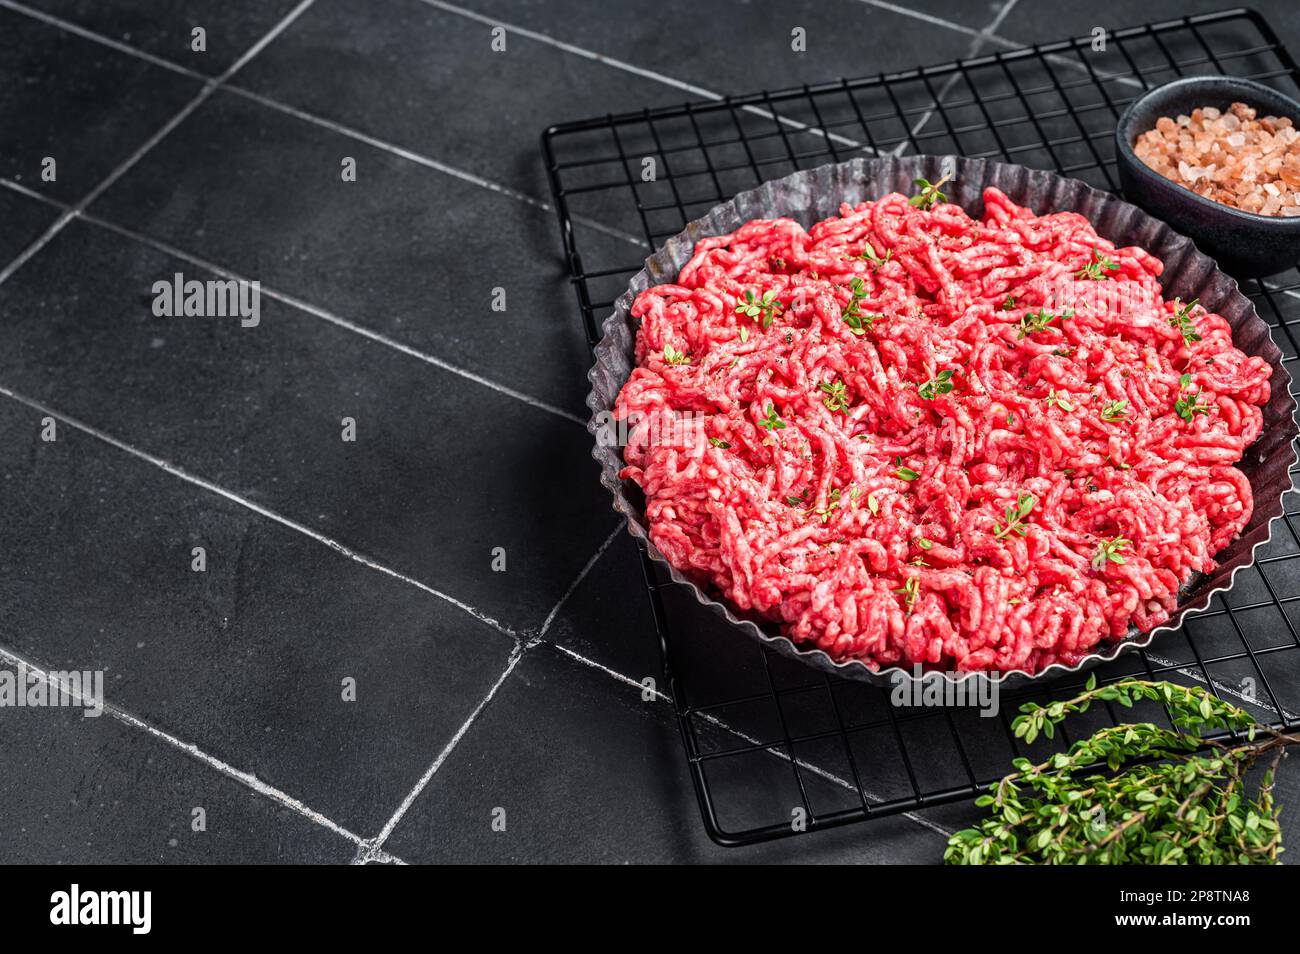 Raw Minced beef and pork meat for a burger patty or meatballs. Black background. Top view. Copy space. Stock Photo